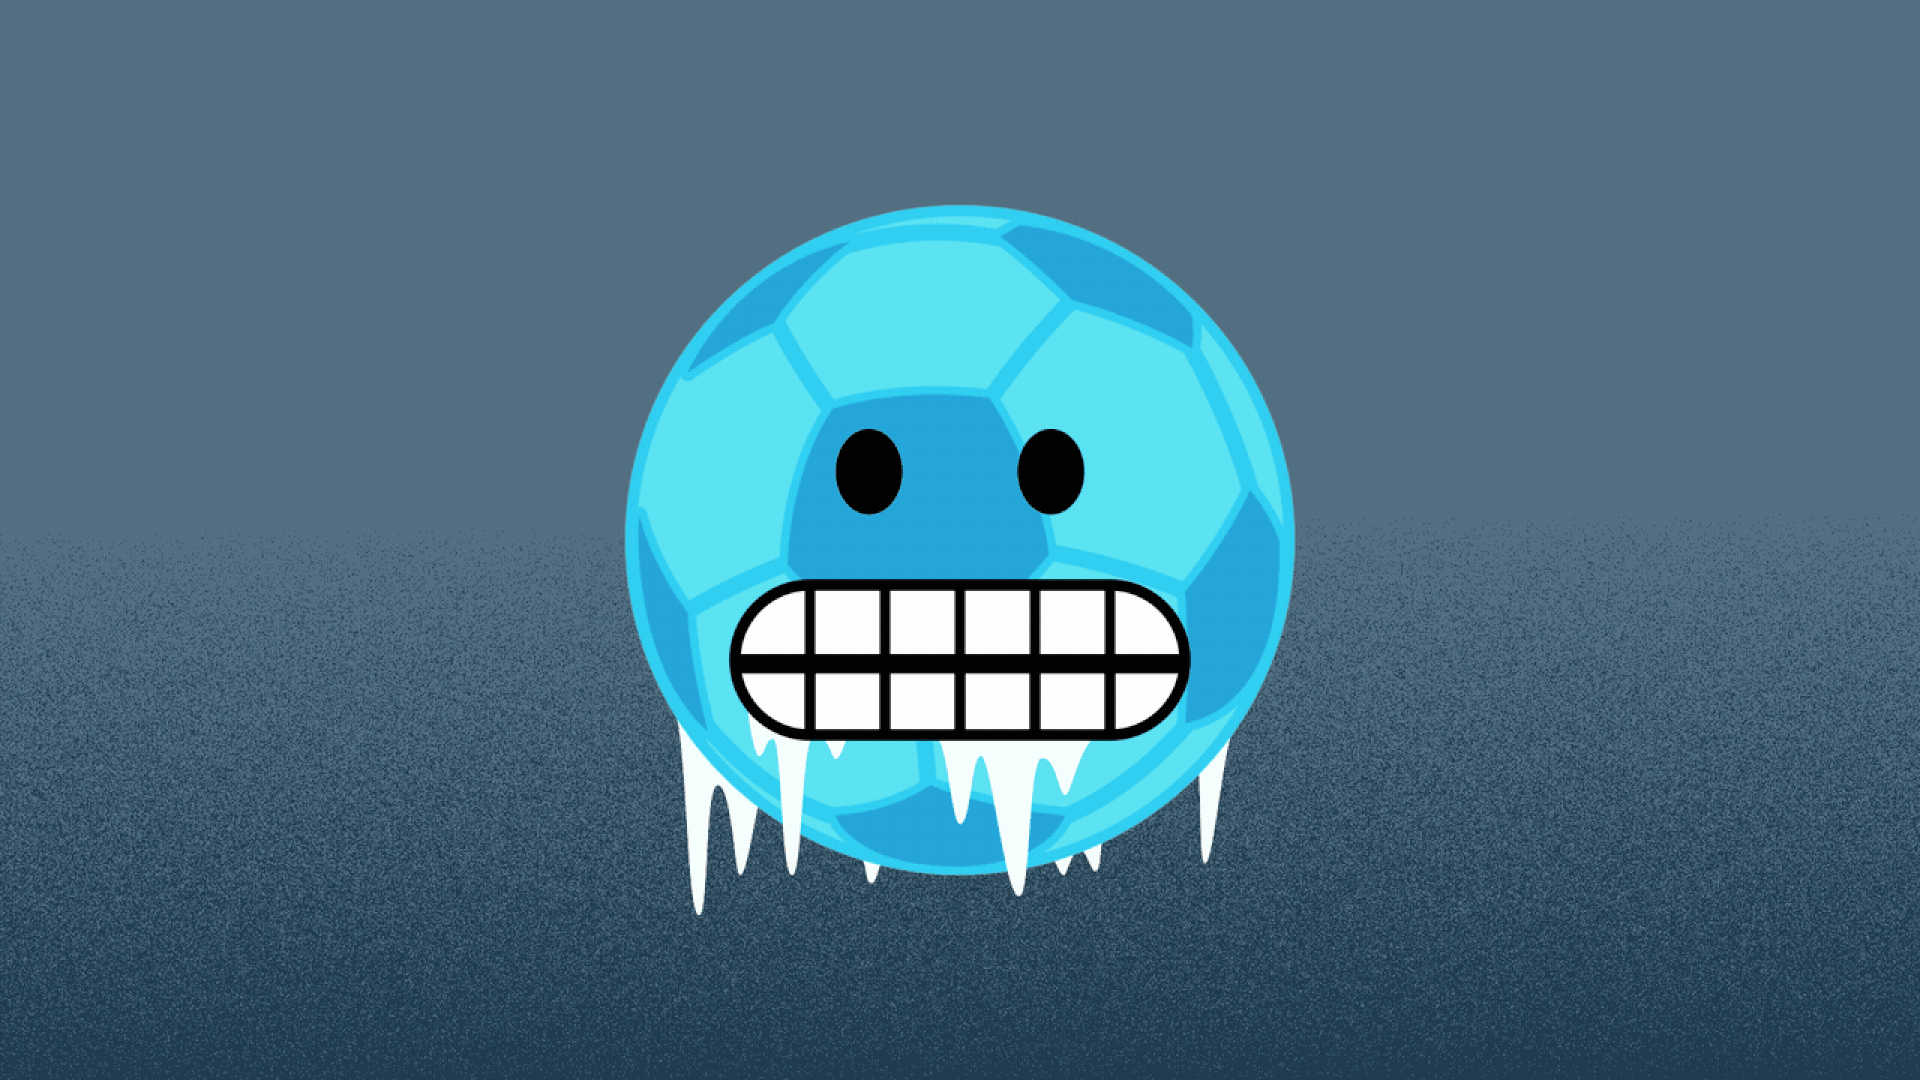 Illustration of a soccer ball emoji mixed with a cold emoji chattering its teeth.